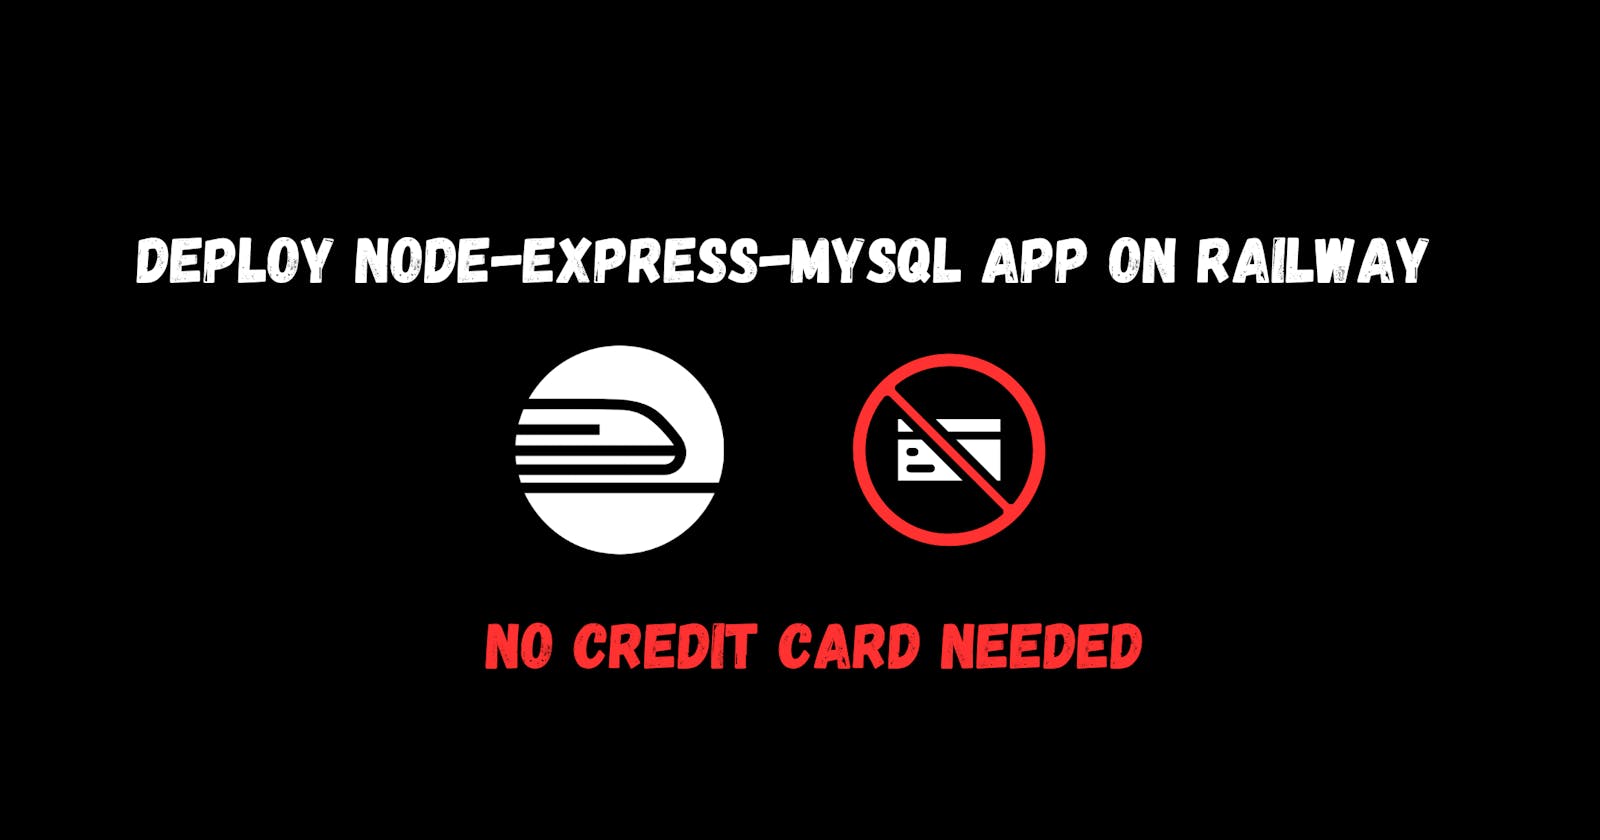 Deploy Node-Express-MySQL app on Railway for free (no credit card required)